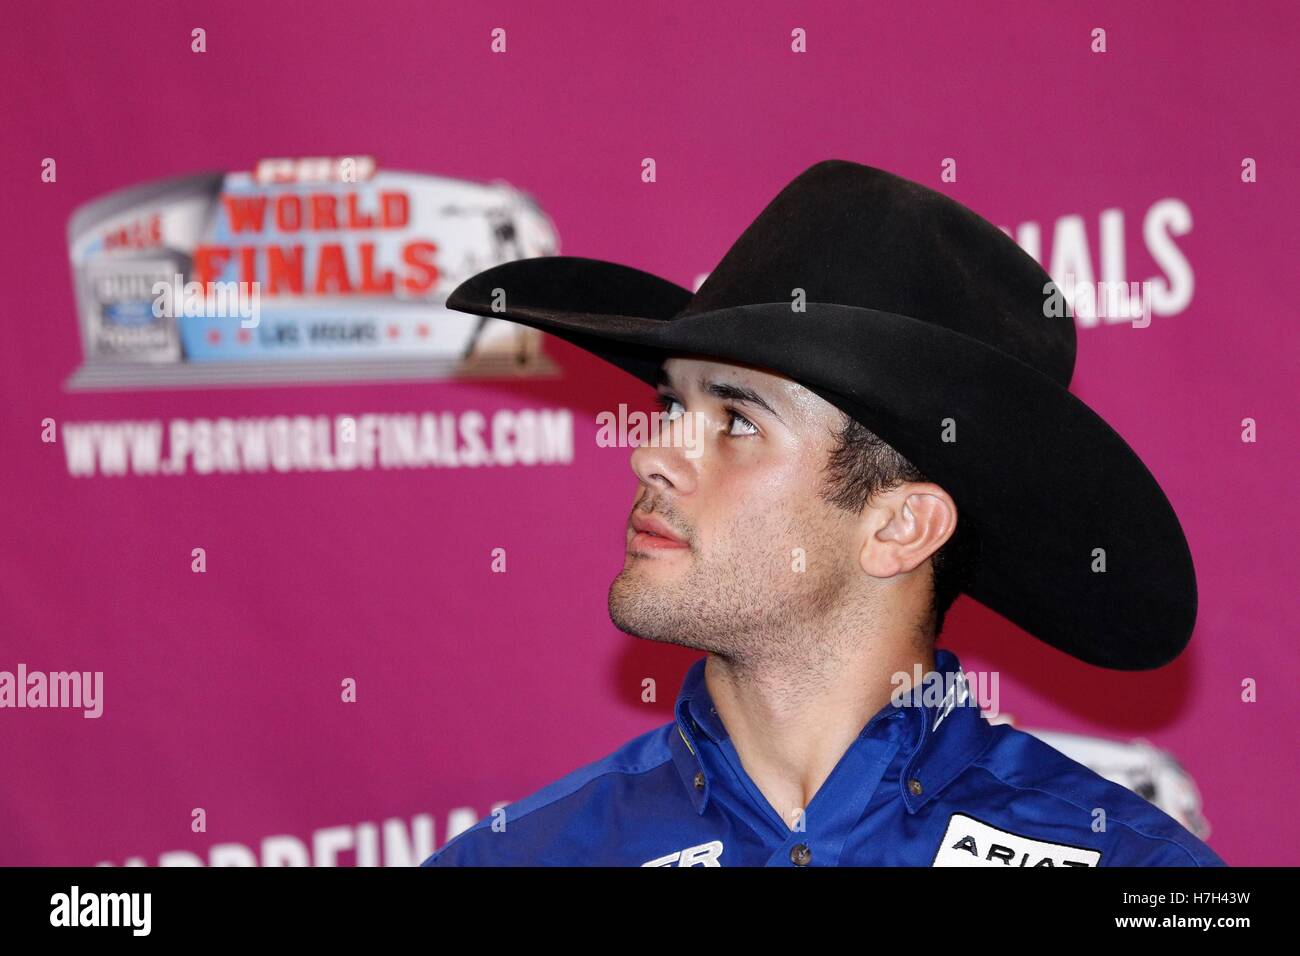 Las Vegas, NV, USA. 4th Nov, 2016. Kaique Pacheco in attendance for The PBR (Professional Bull Riders) Built Ford Tough World Finals 2016 - Round 3, T-Mobile Arena, Las Vegas, NV November 4, 2016. Credit:  James Atoa/Everett Collection/Alamy Live News Stock Photo